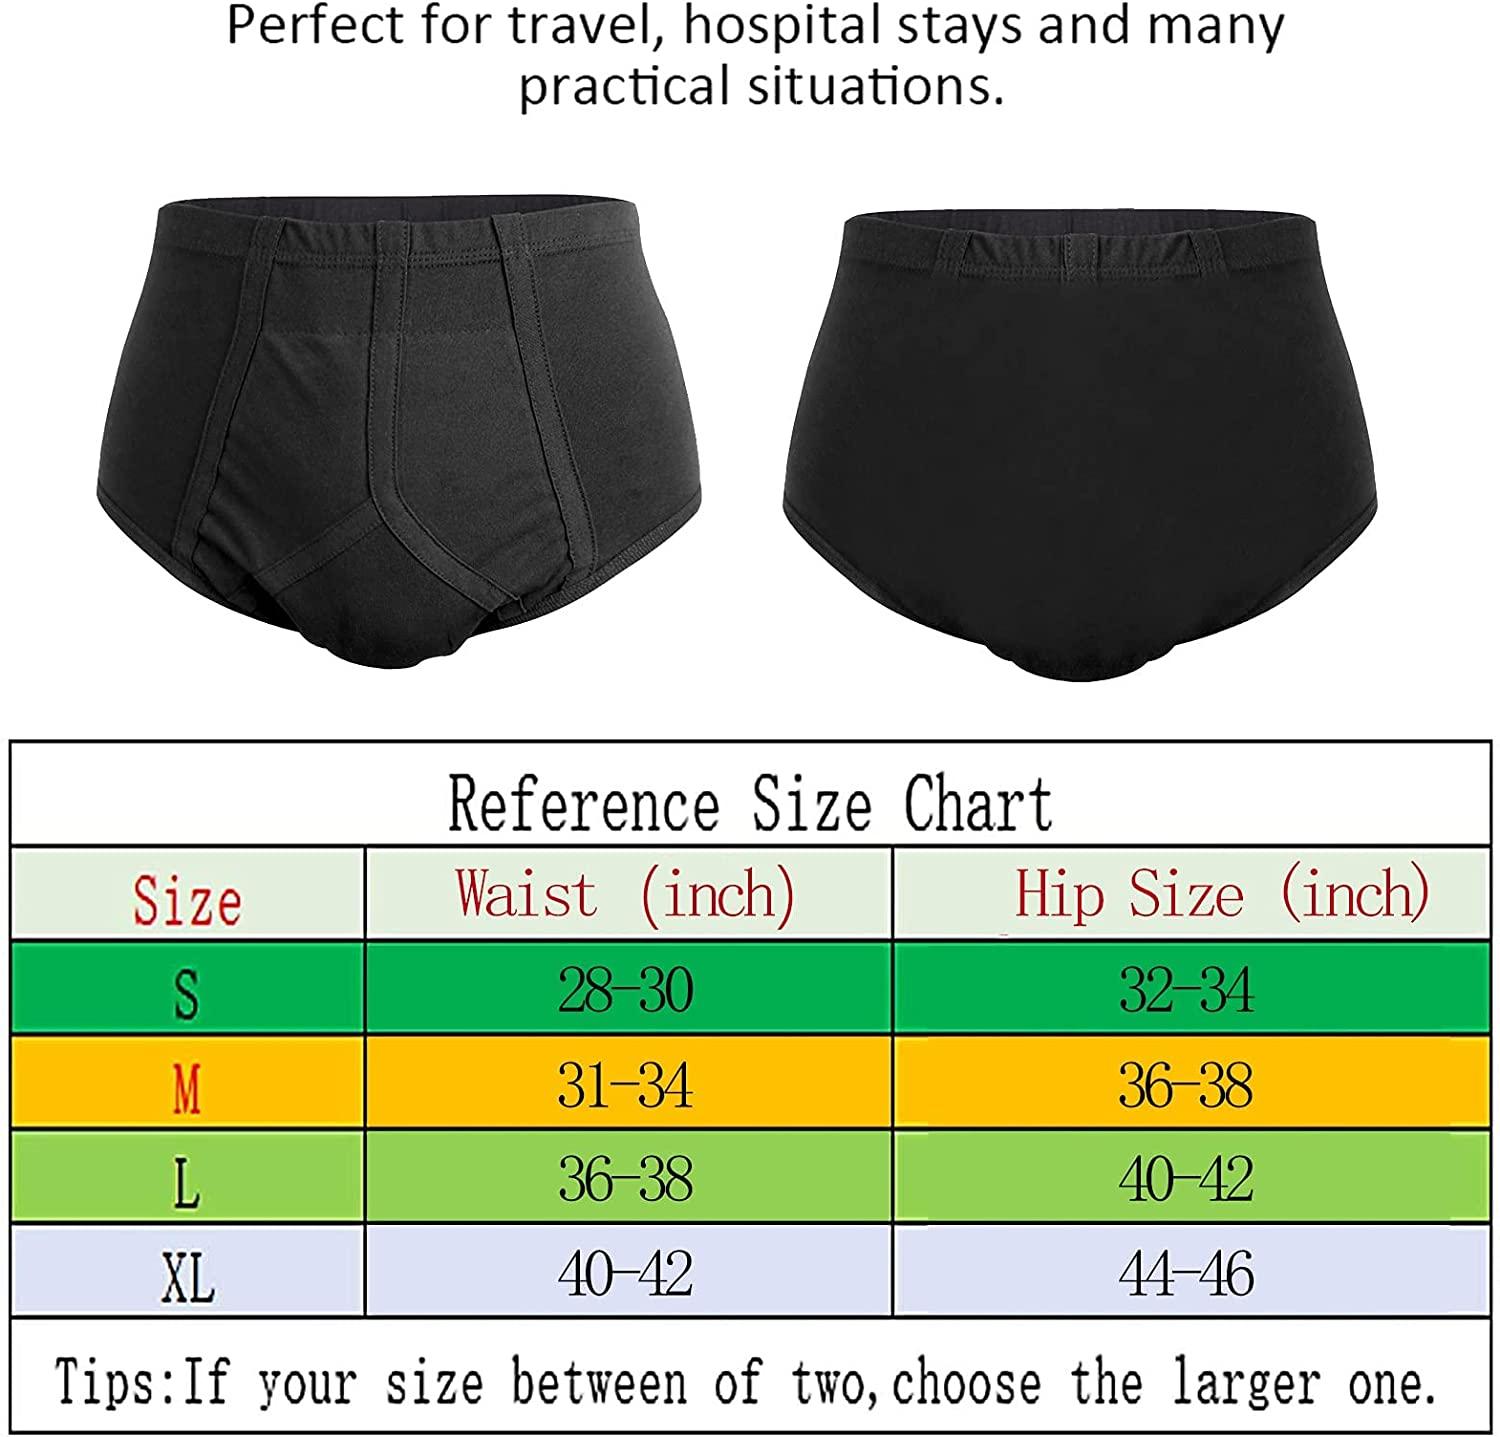 Men's Incontinence Underwear 3-Packs Bladder Control Briefs Washable Urinary  Underwear for Men Cotton Incontinence Briefs with Front Absorption Area  Incontinence Boxer Briefs Large (Pack of 3)